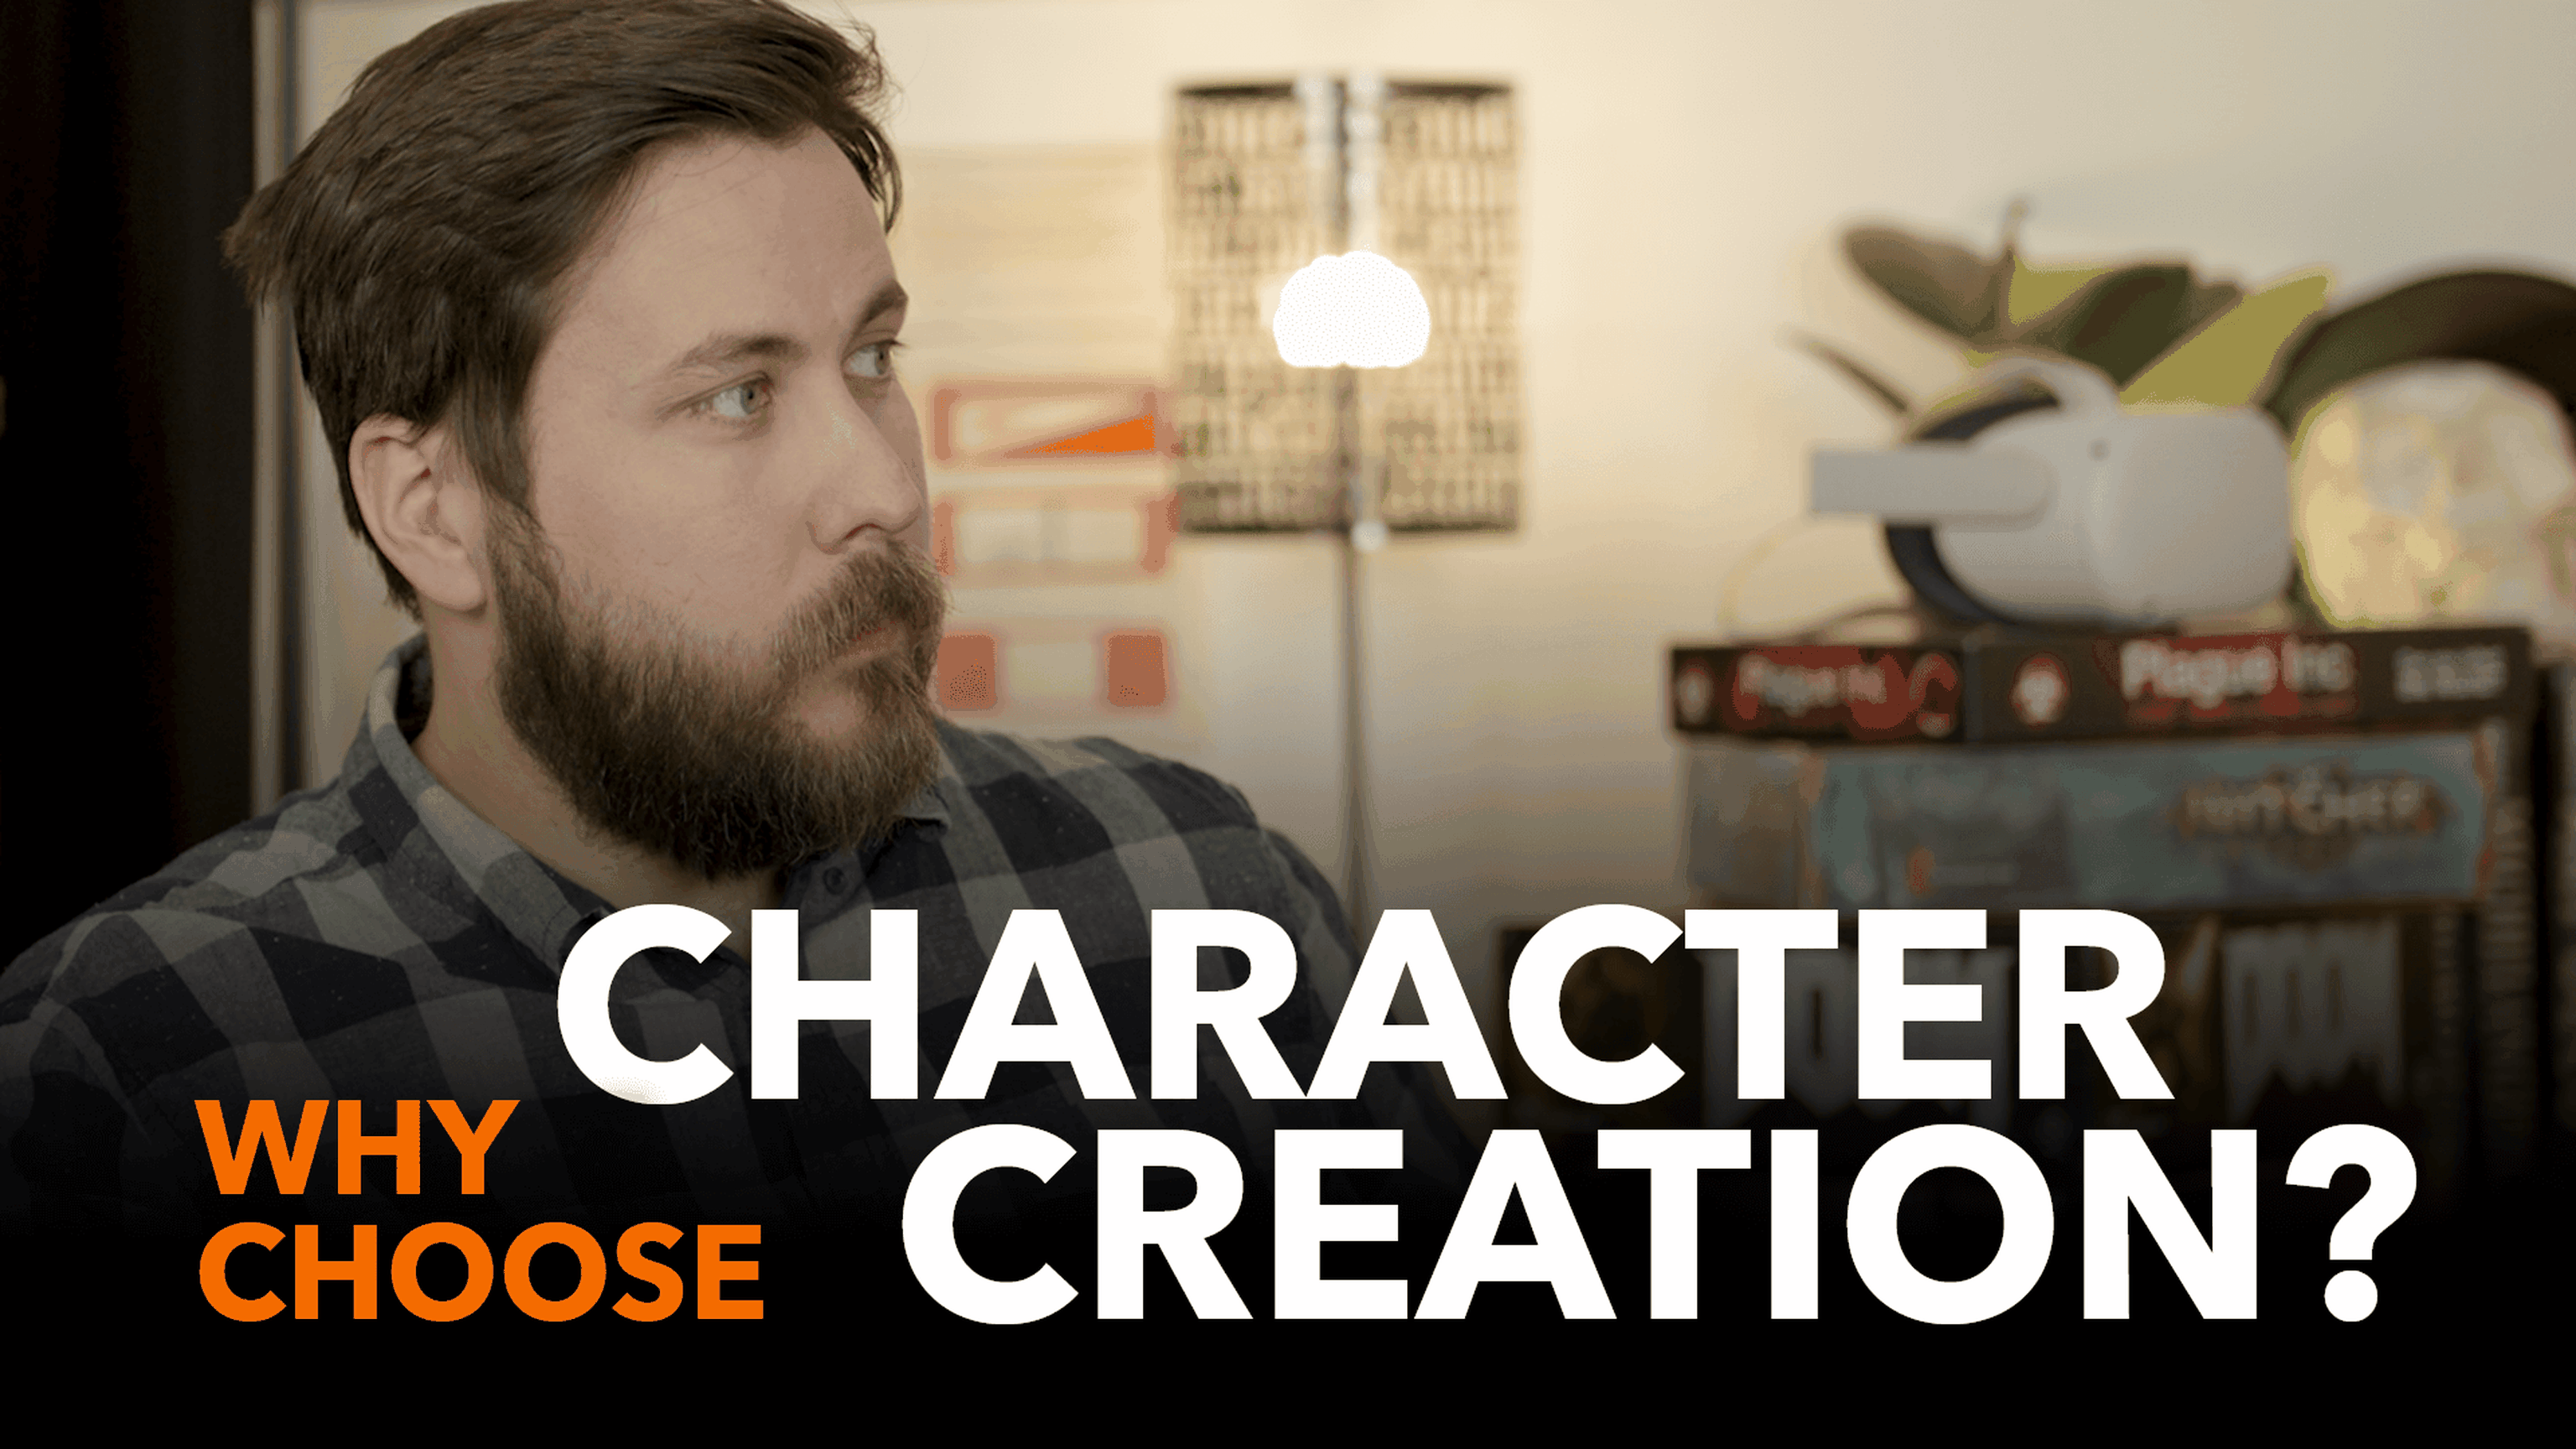 Image of Michael Davies with text saying why choose character creation